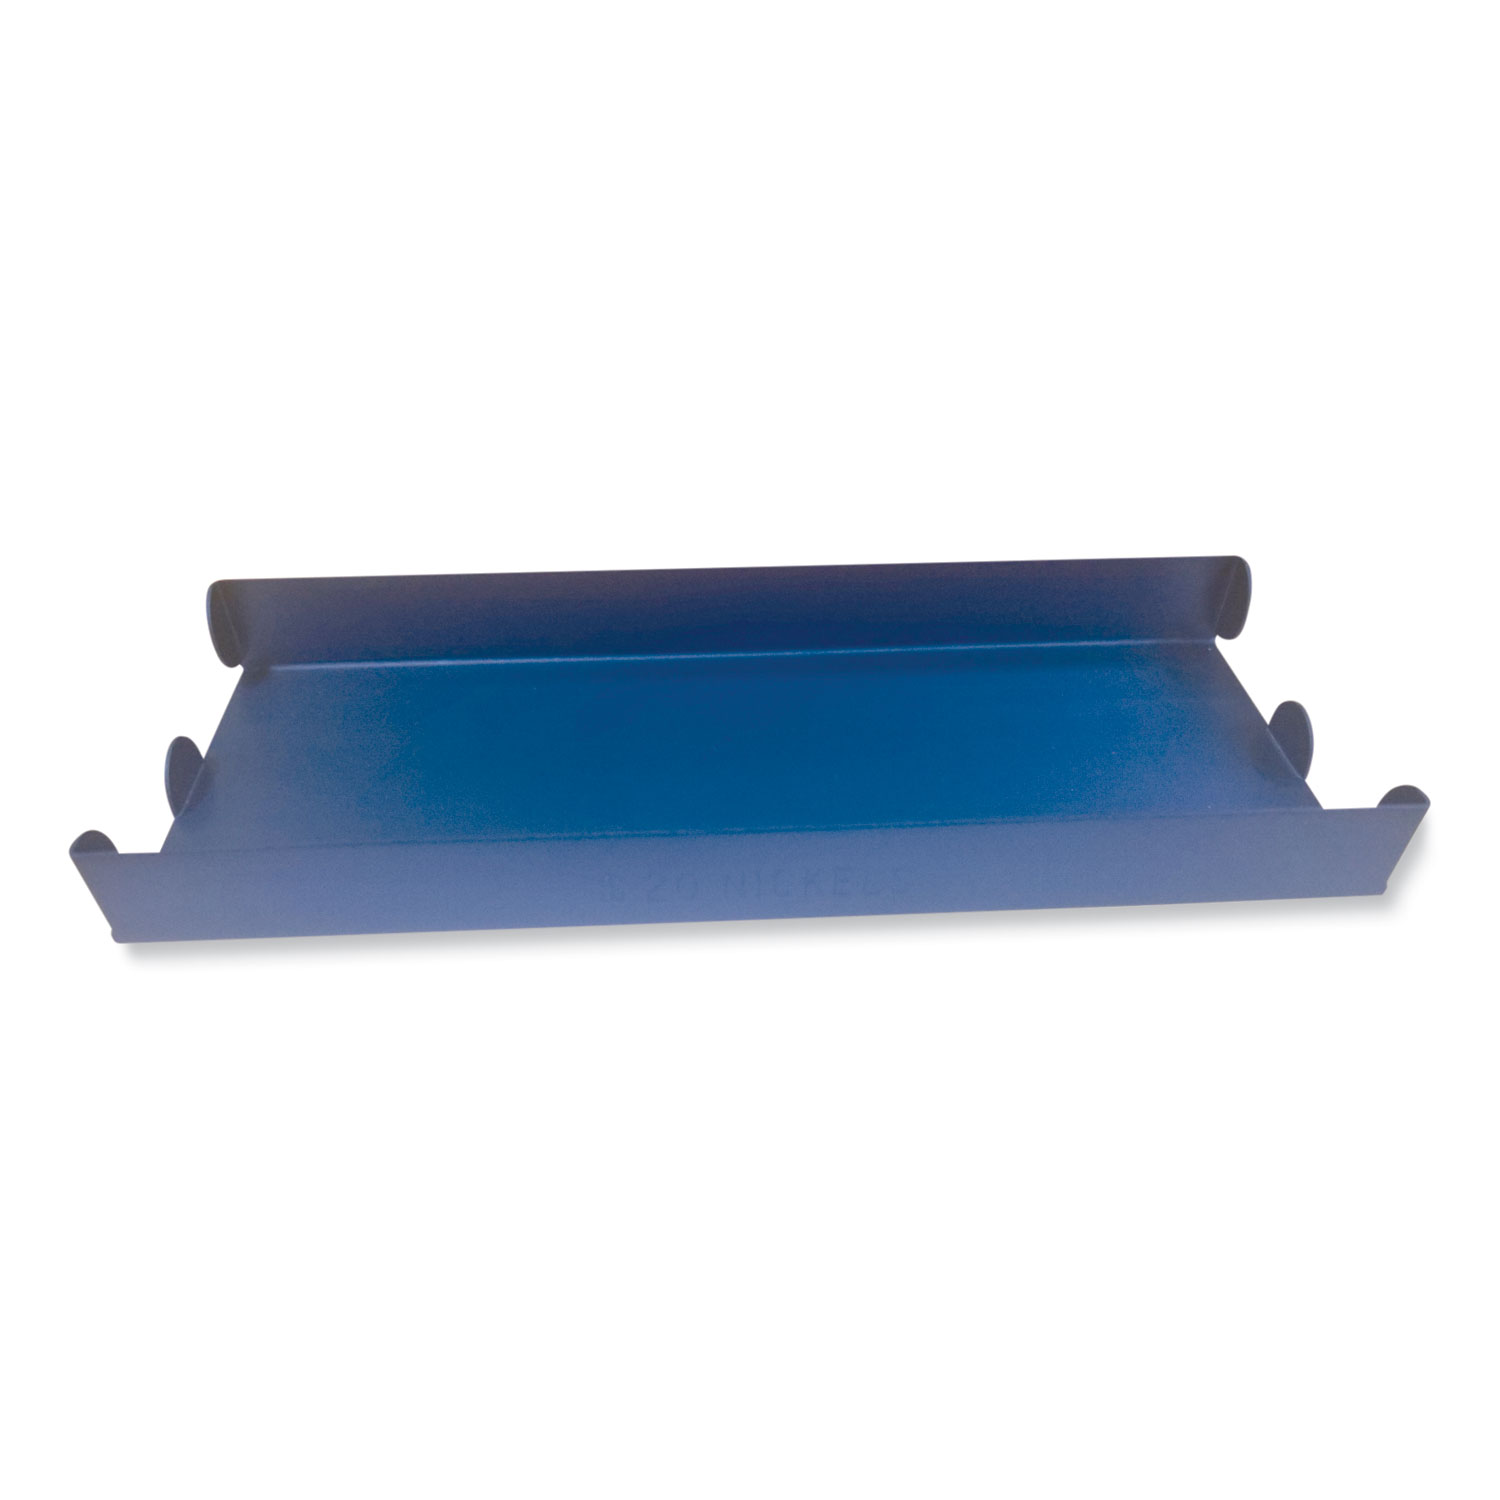 CONTROLTEK® Metal Coin Tray, Nickels, 3.5 x 10 x 1.75, Blue